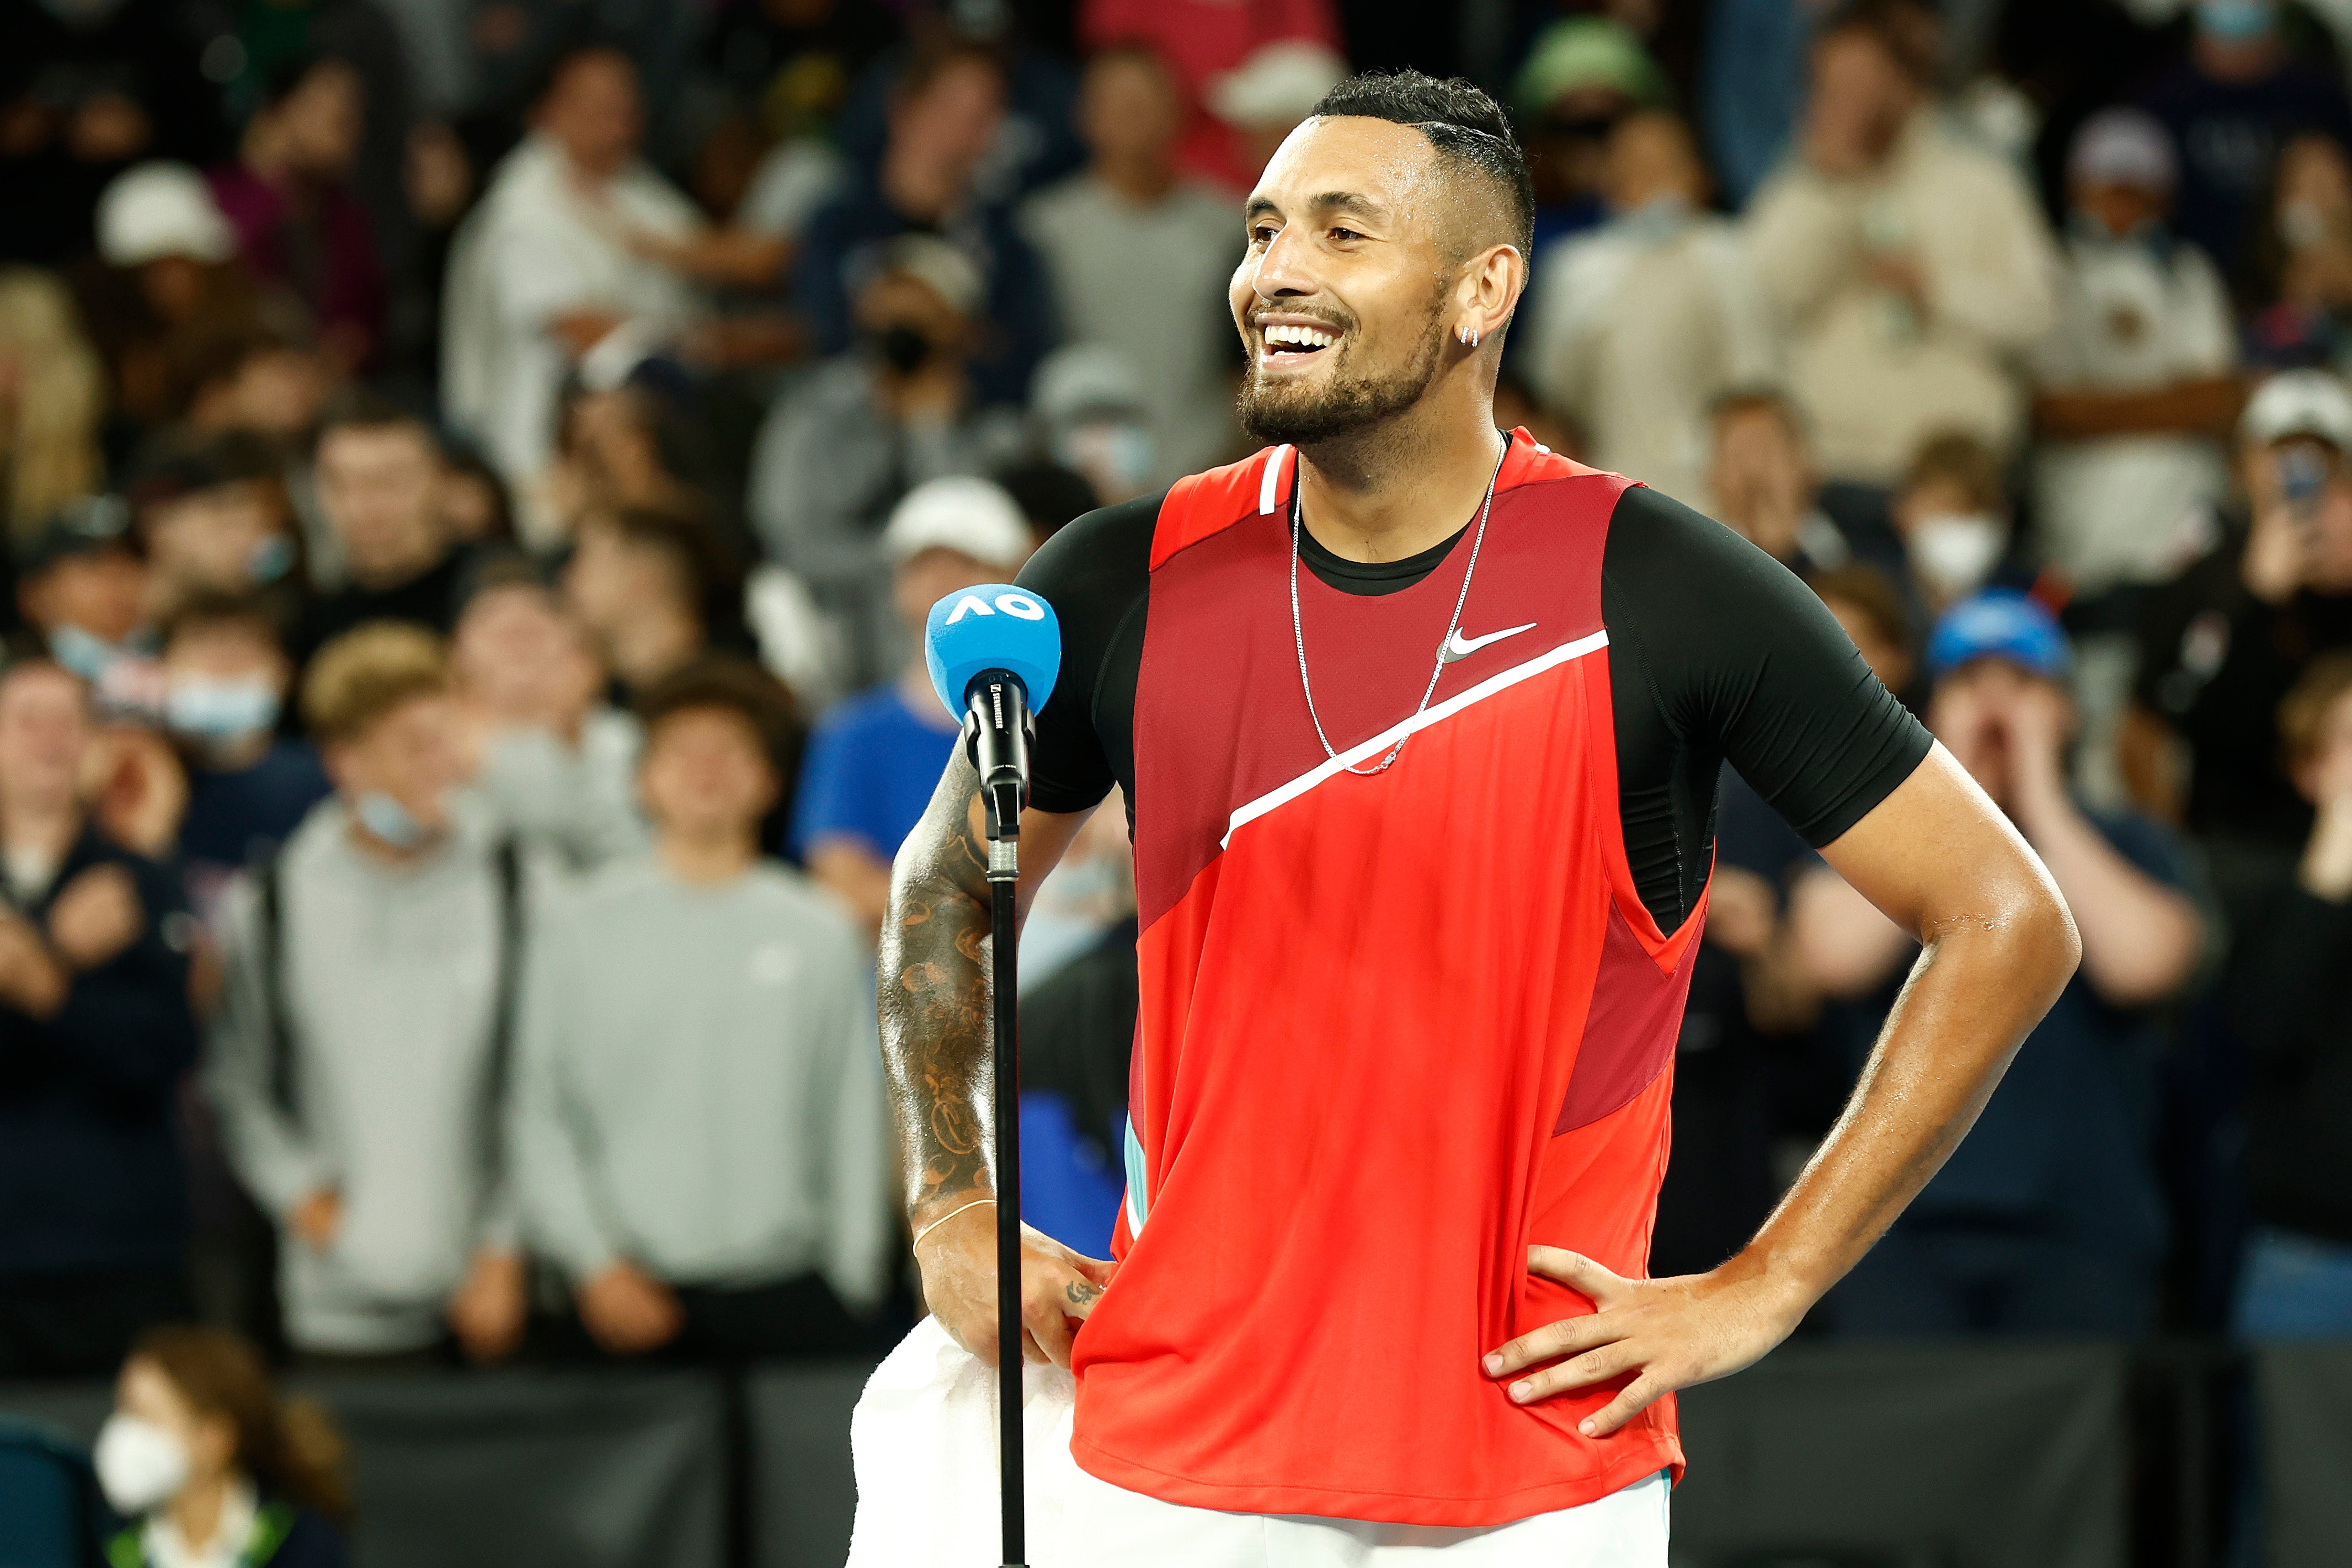 Nick Kyrgios believes that ex-tennis players do not always have a right to comment on current players